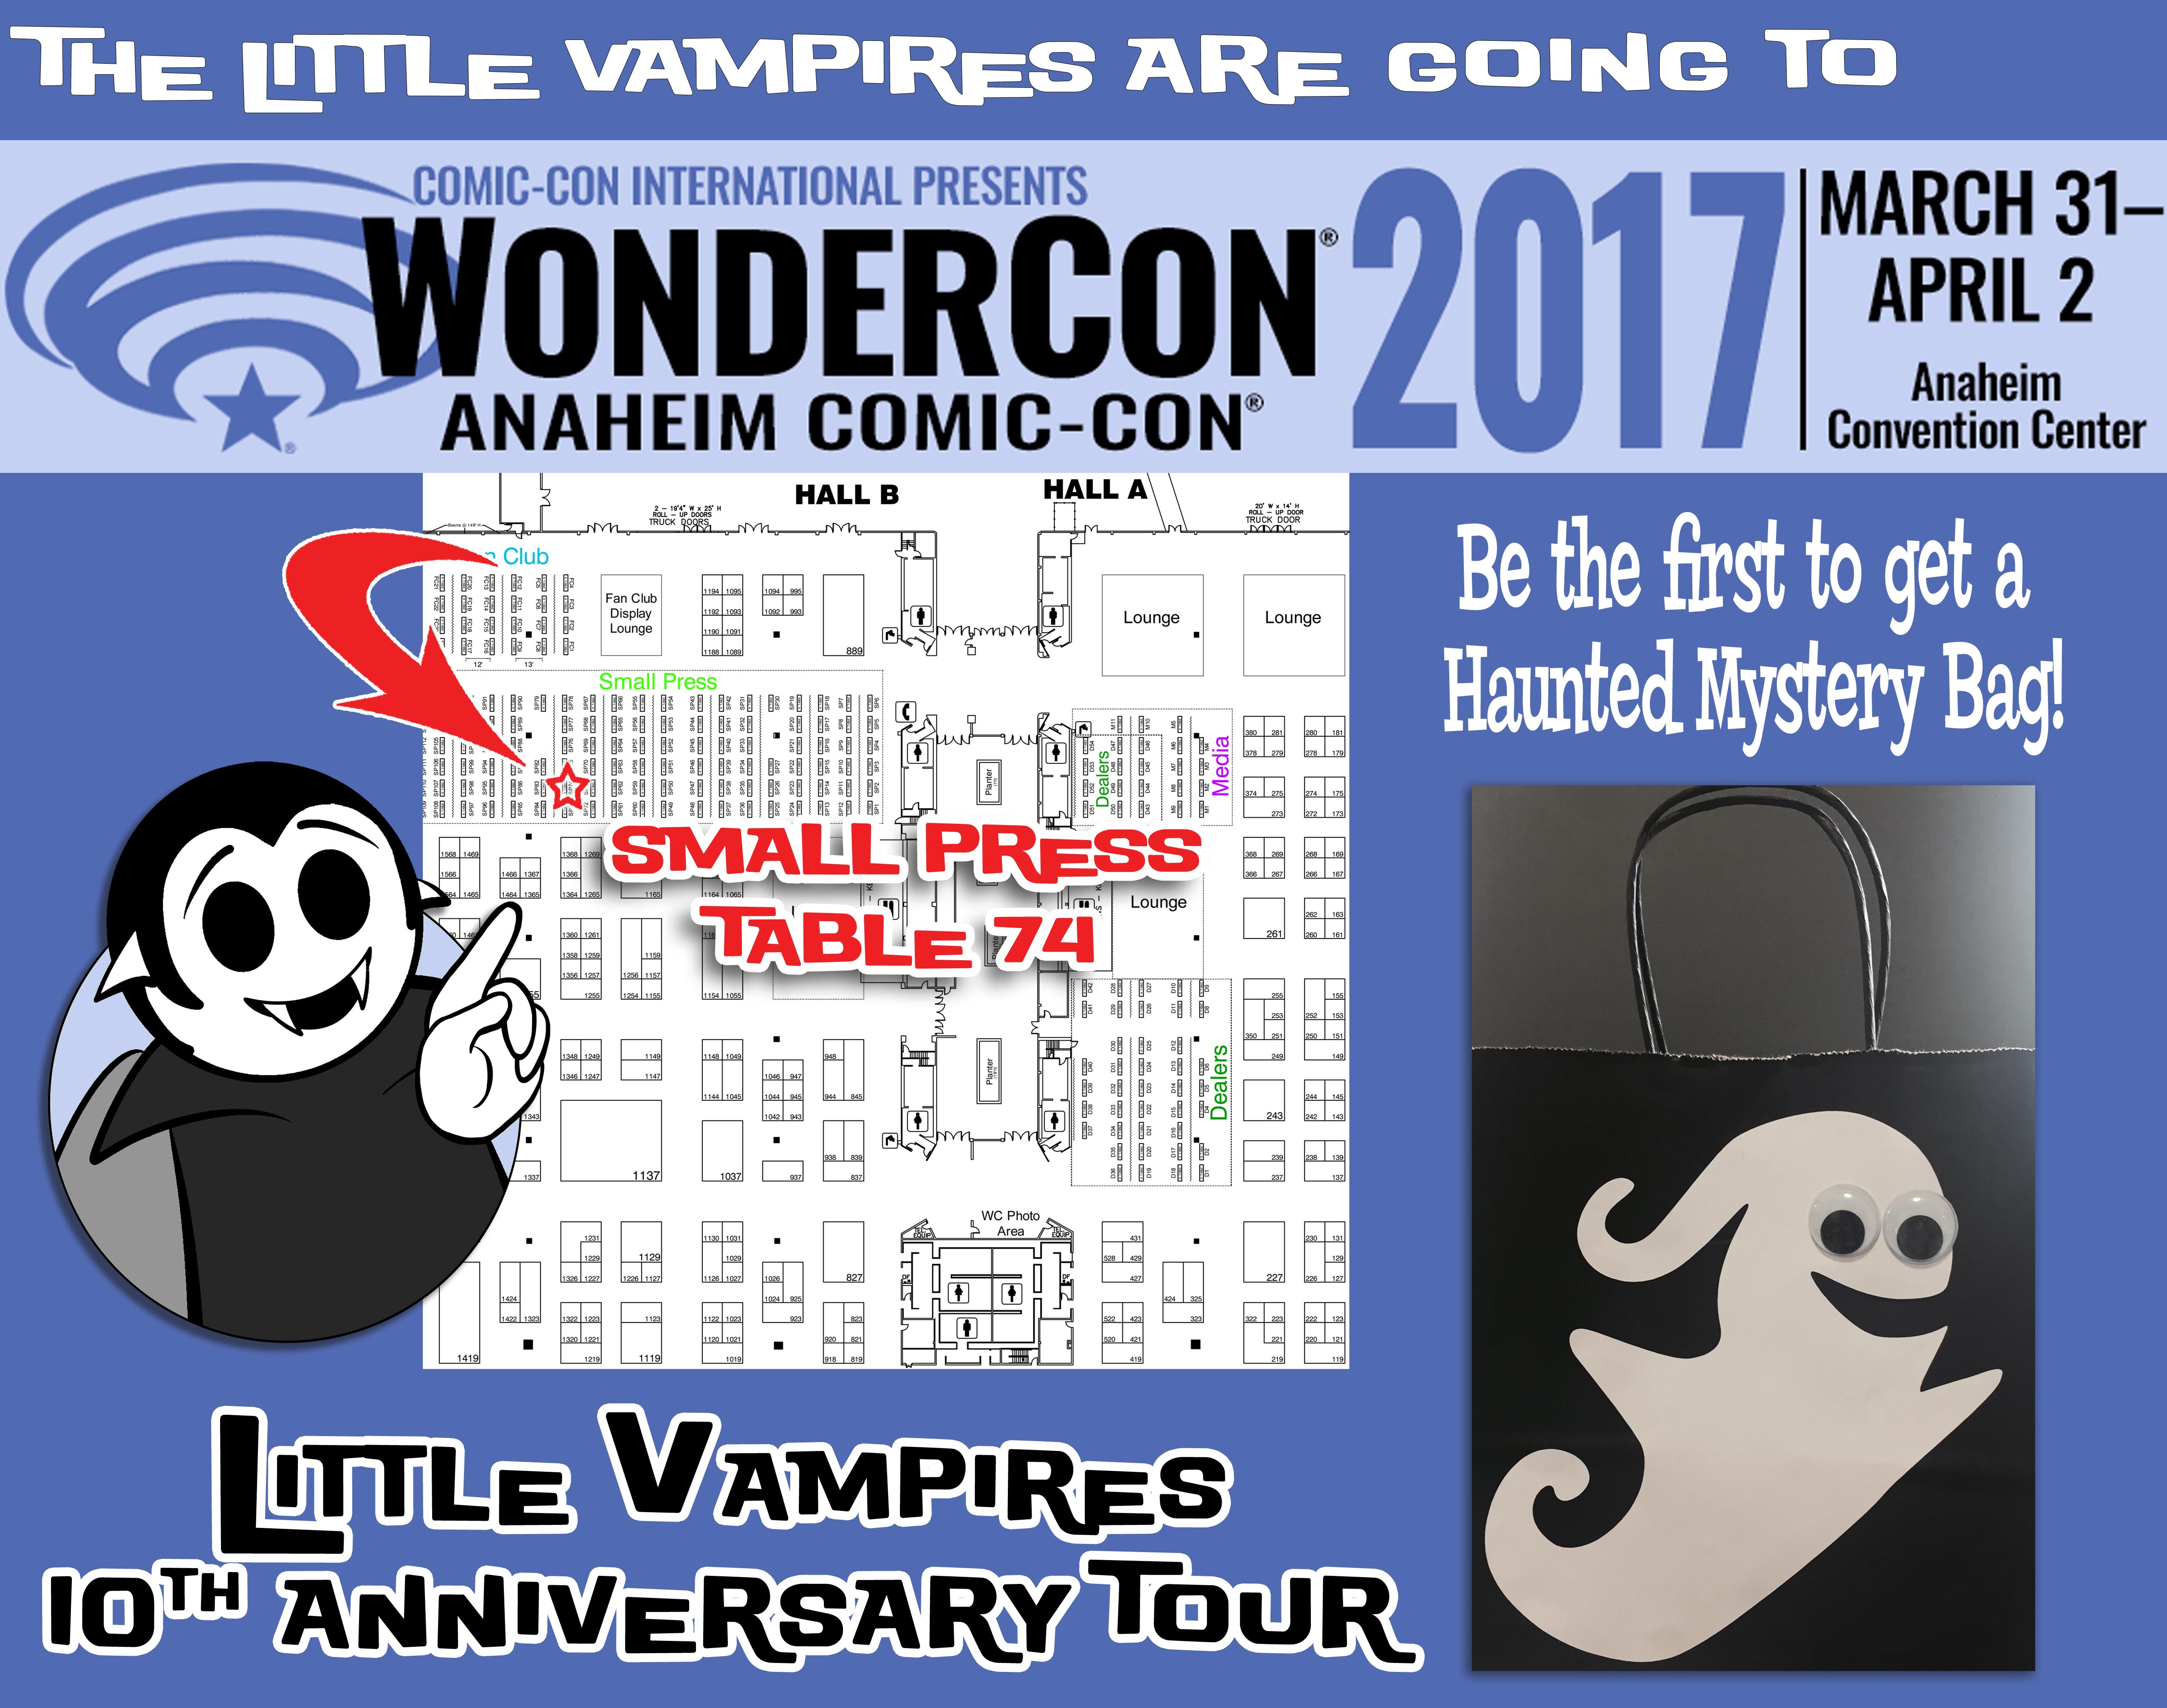 WonderCon 2017 exhibitor floor map with the Little Vampires booth highlighted